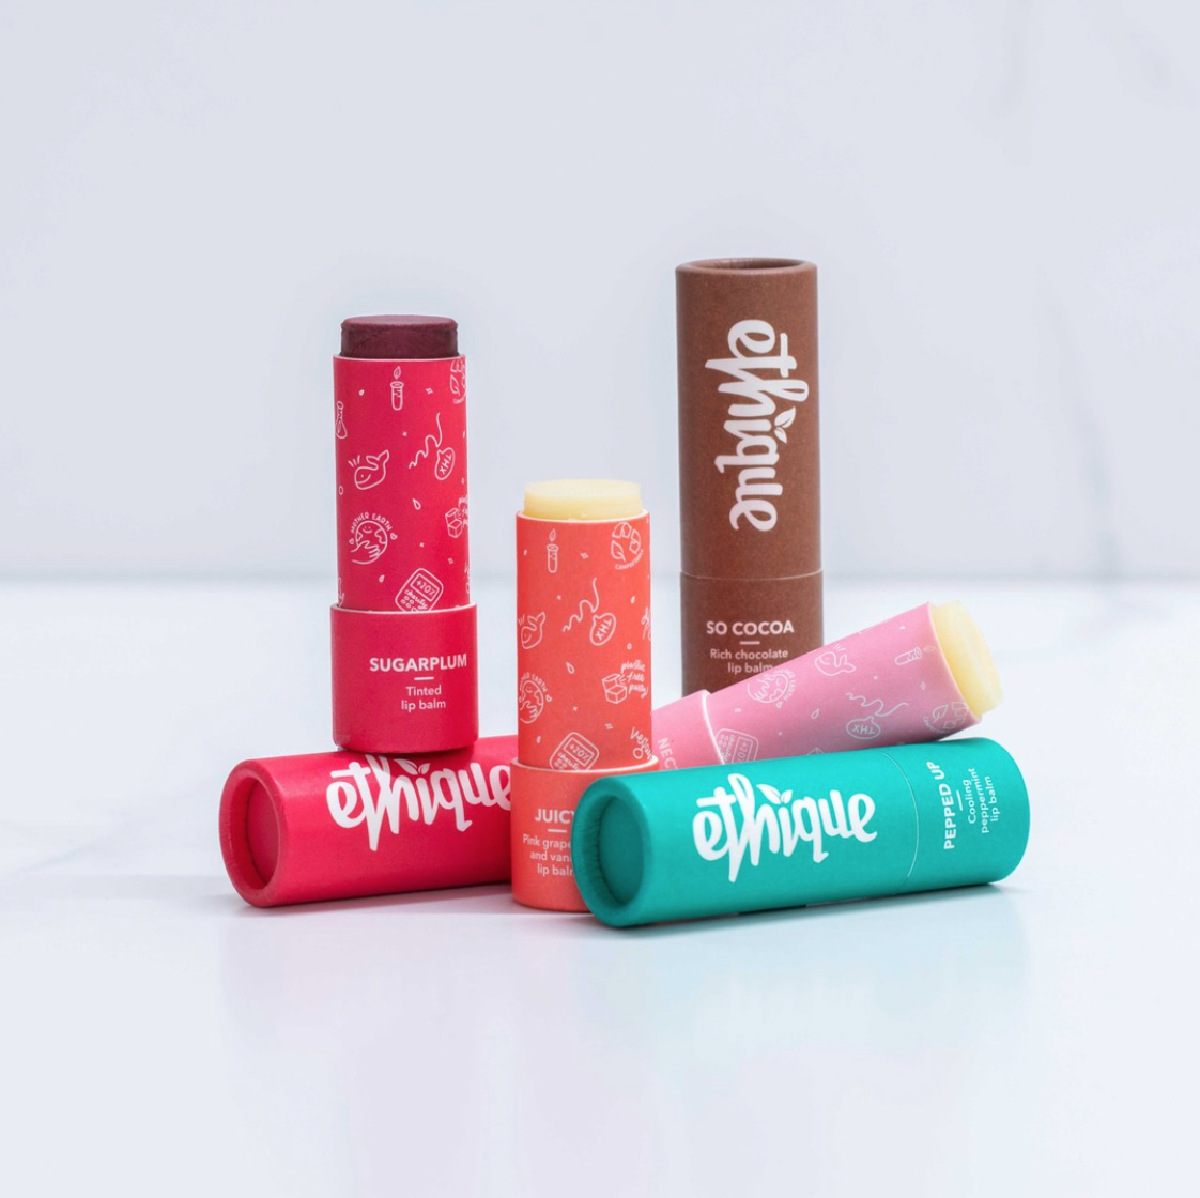 Five colorful eco-friendly tubes of Ethique vegan lip balms casually arranged on a white surface against a white background. 